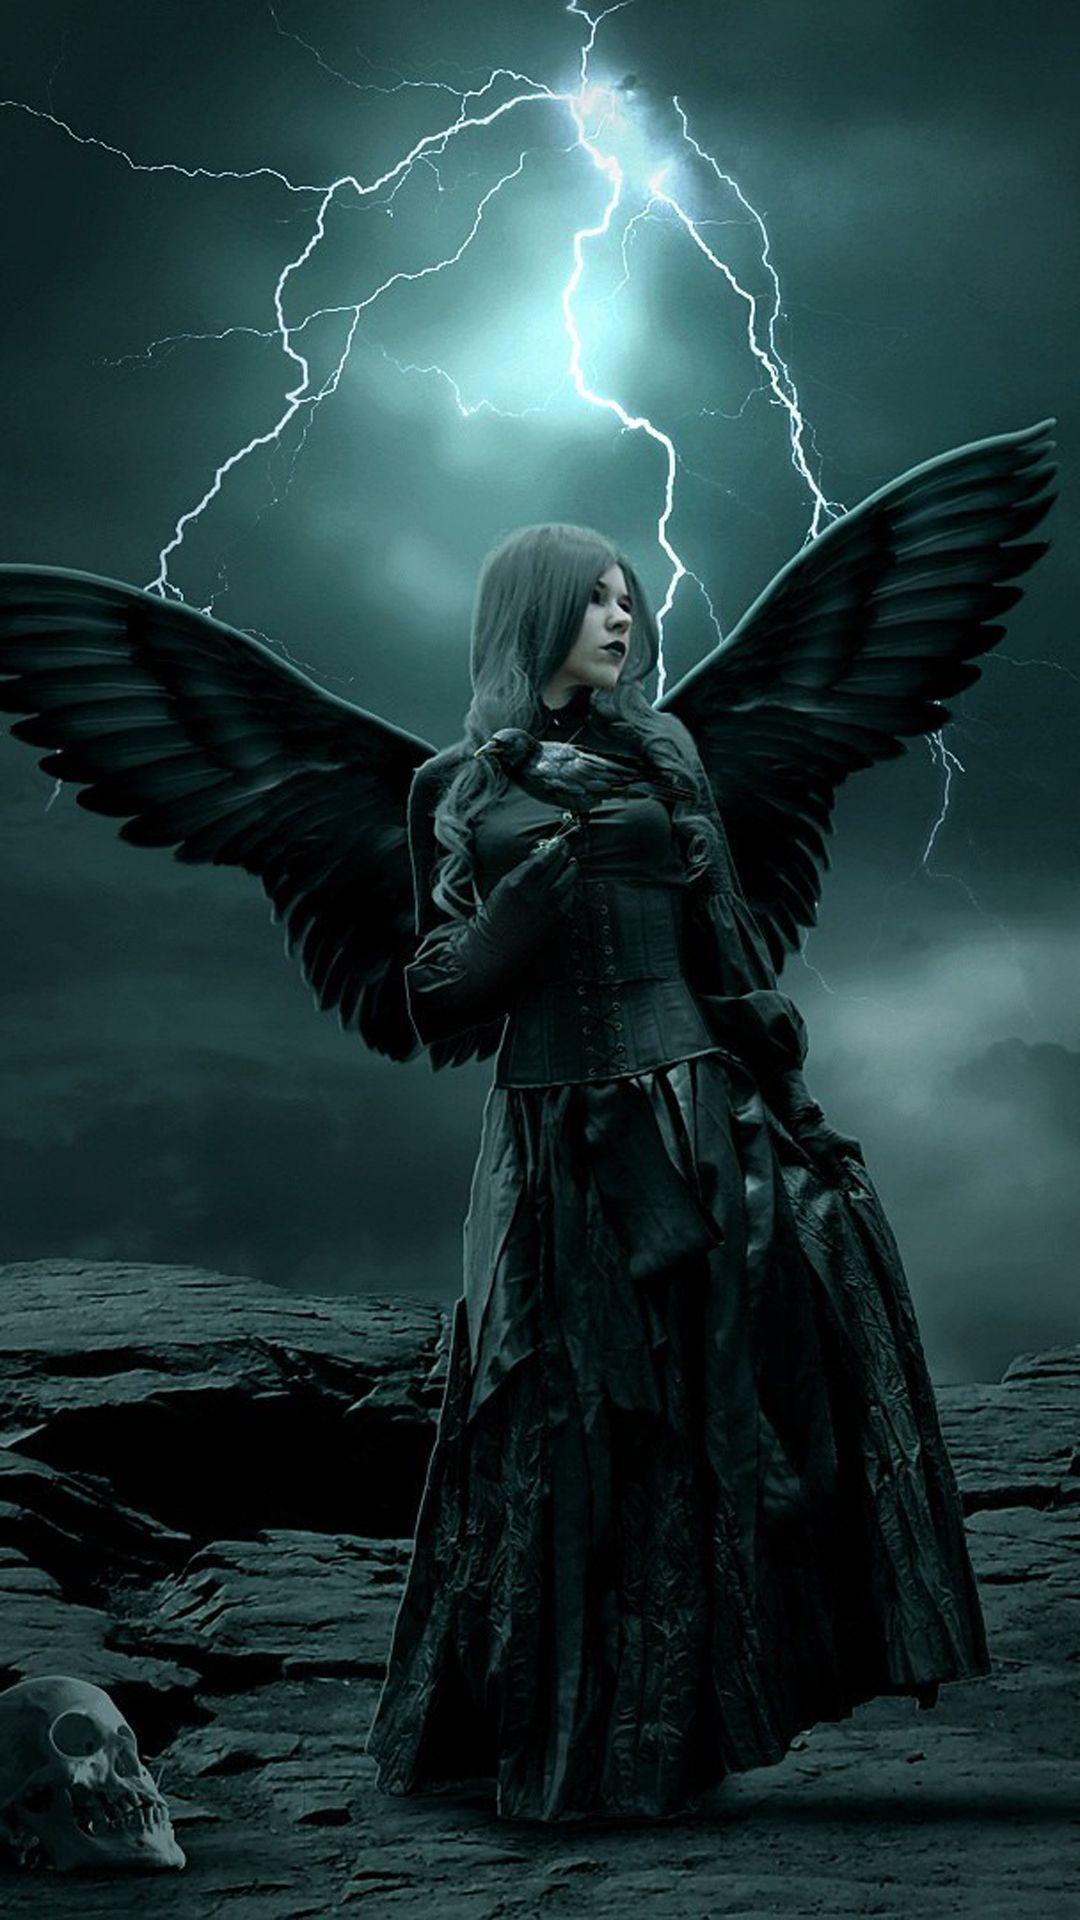 1080 x 1920 · jpeg - Gothic Angel Wallpapers - Wallpaper Cave